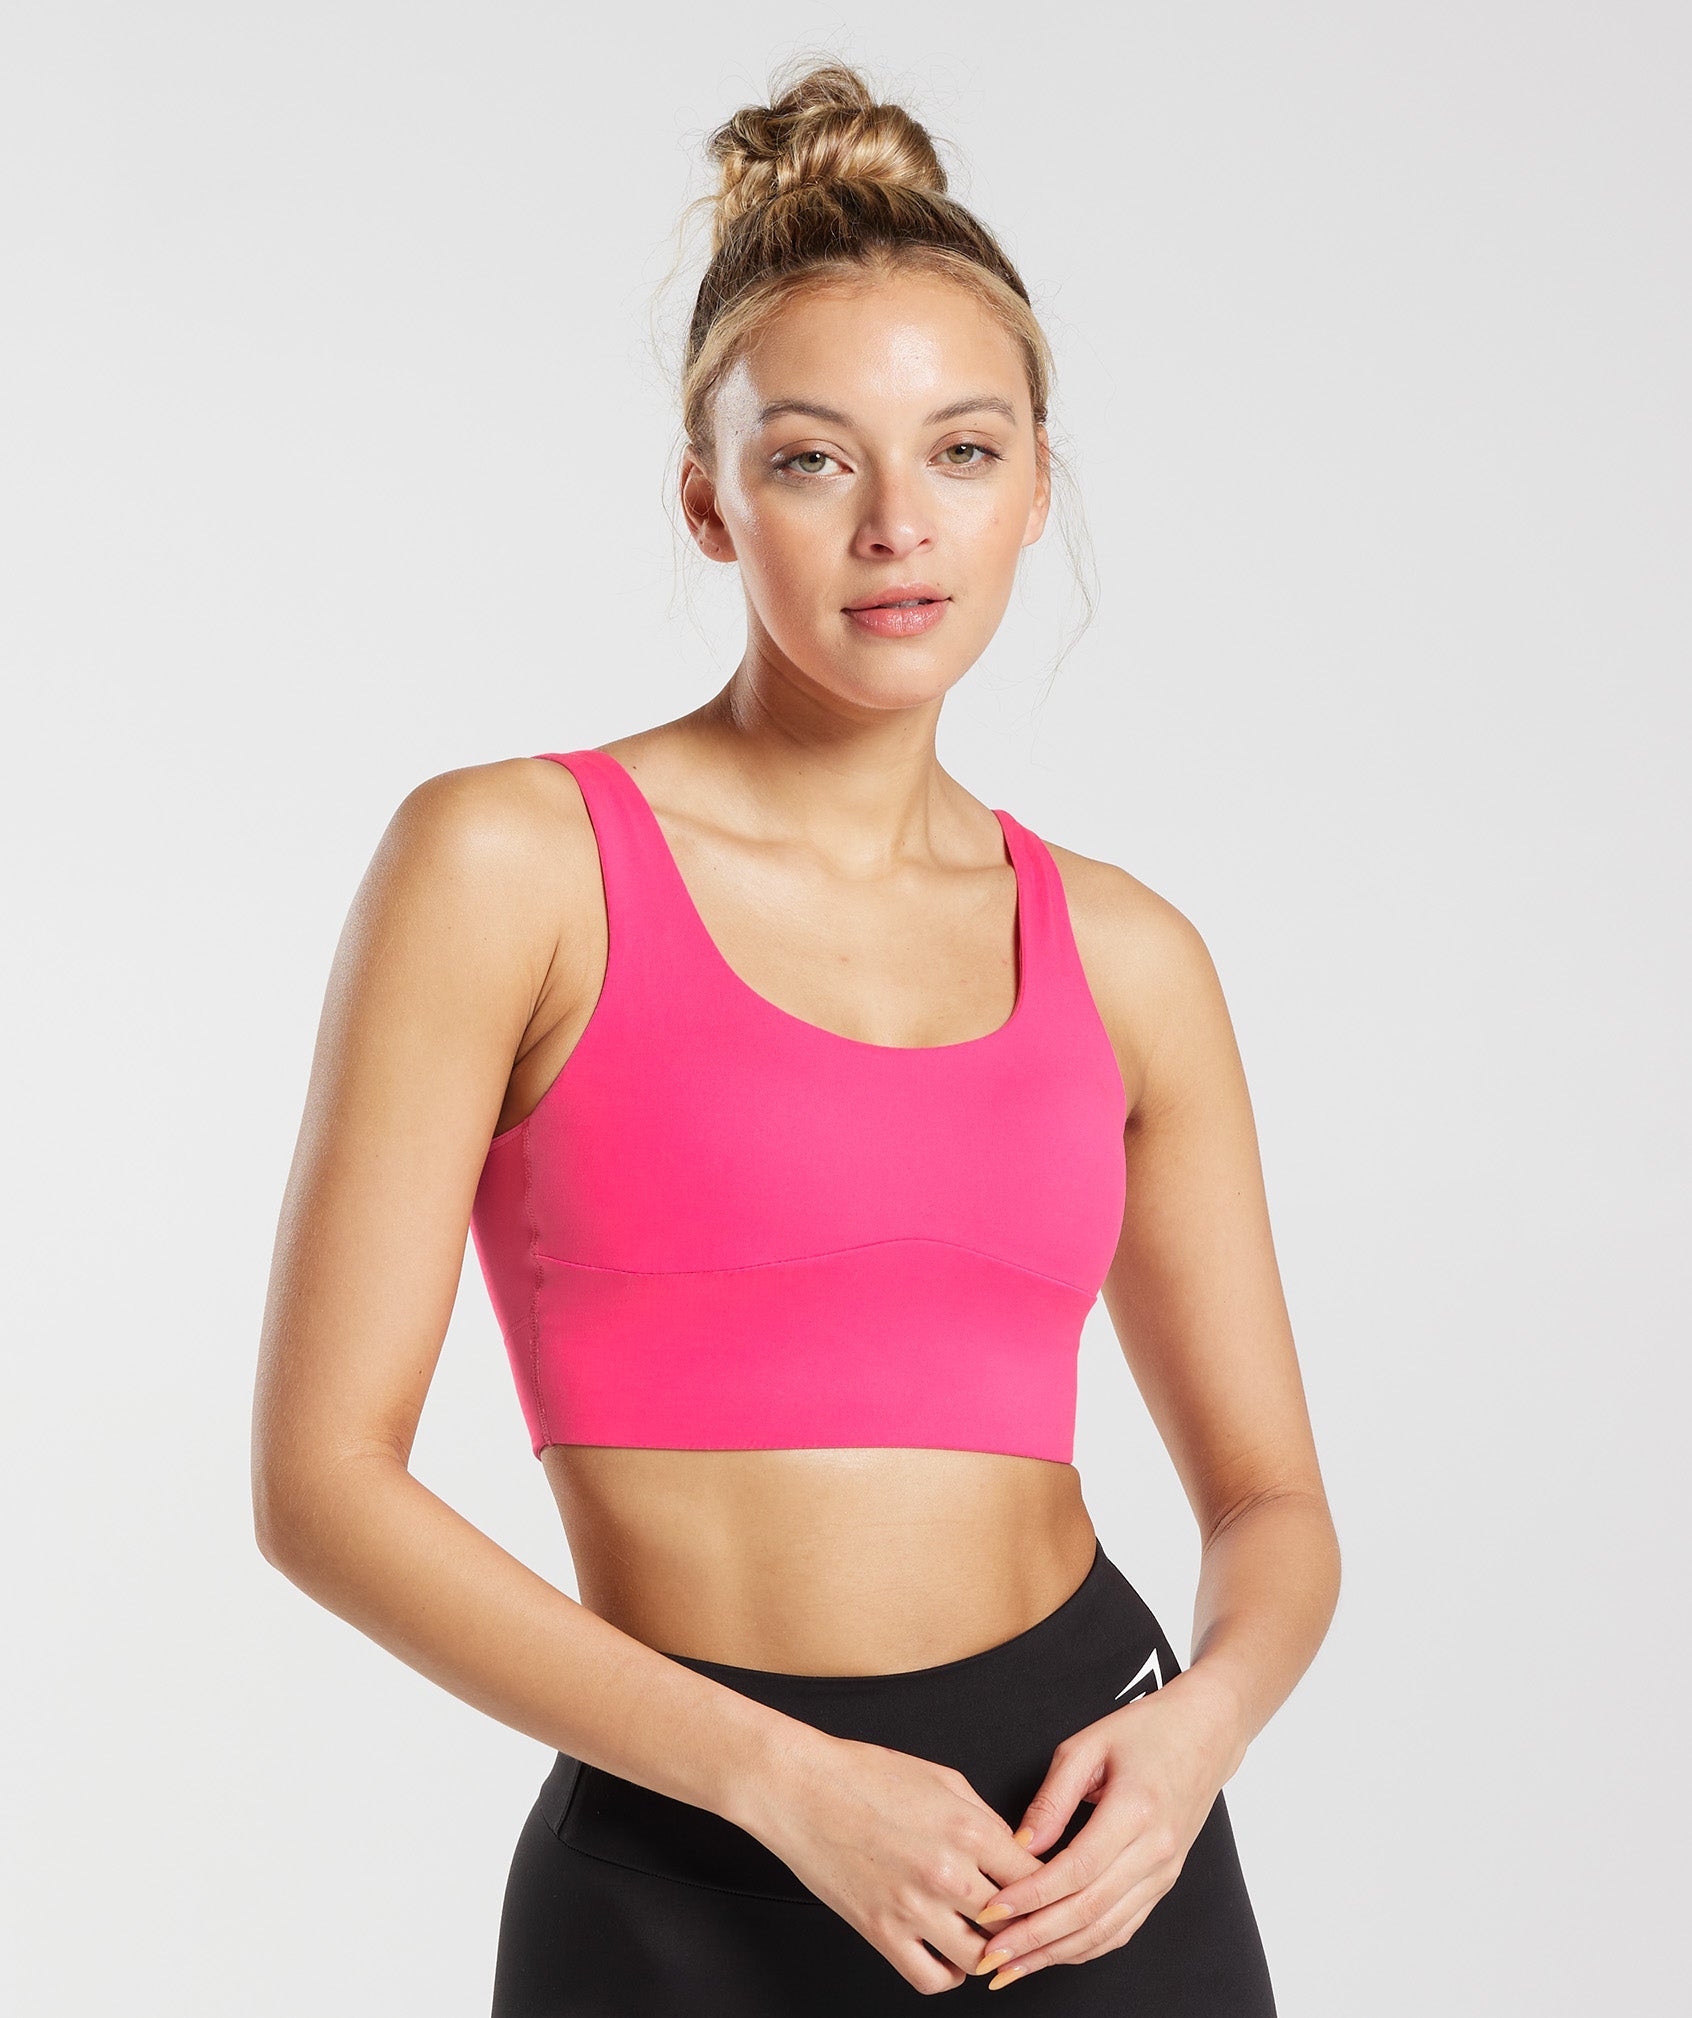 Flirty Trendy Pink and Blue Gym Outfit Set for ladies - FULL SET